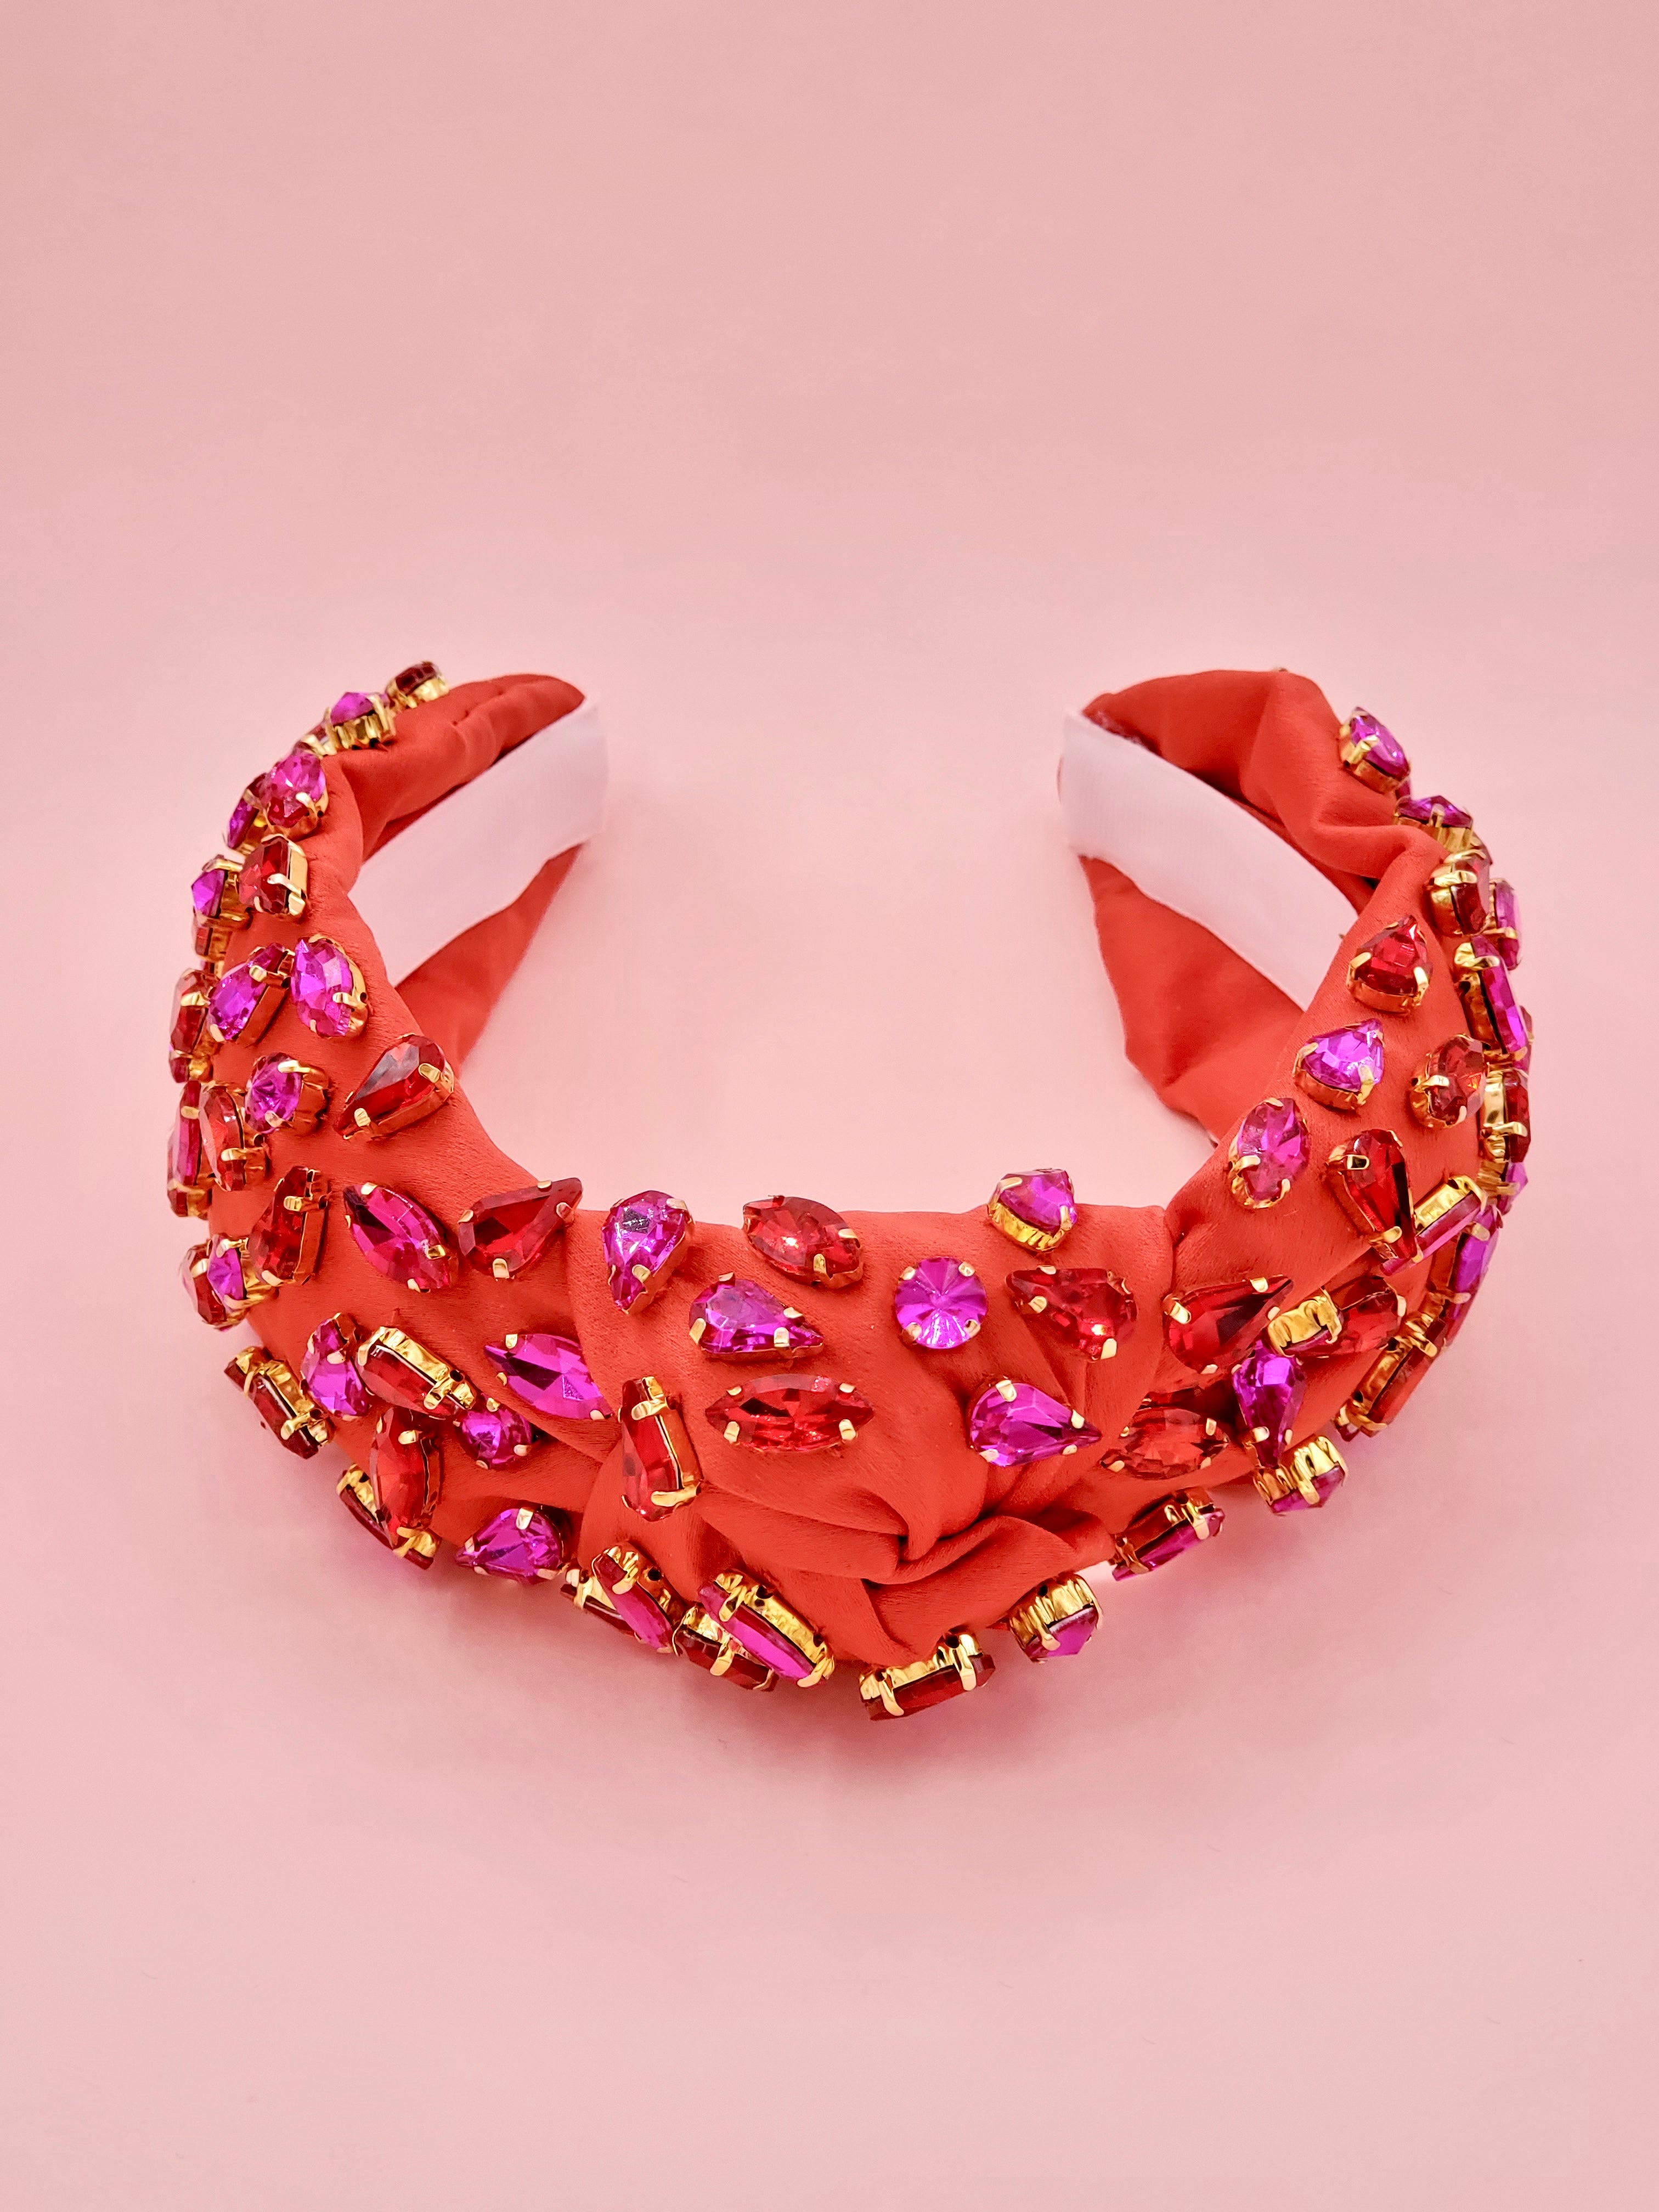 Red Satin Headband with Hot Pink and Red Crystal Embellishments – RIAD